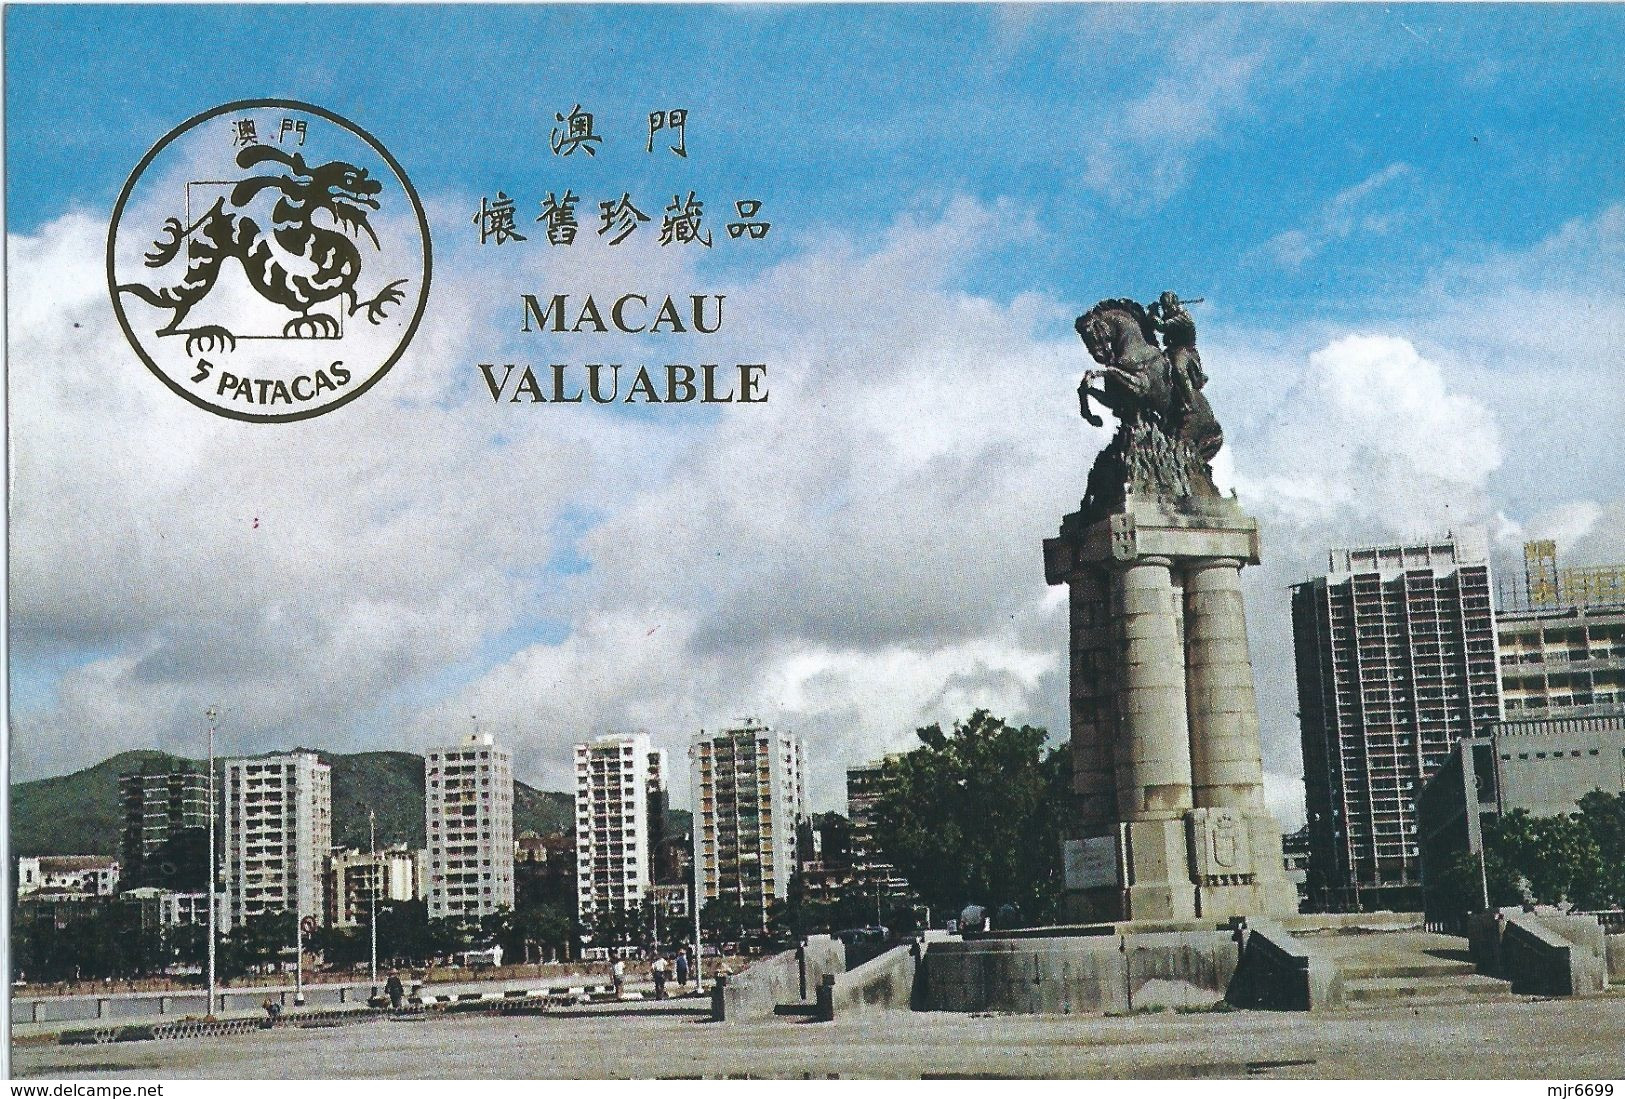 MACAU-THE MONUMENT TO AMARAL #12 (WITH JAPANESE DESCRIPTION) - Macao